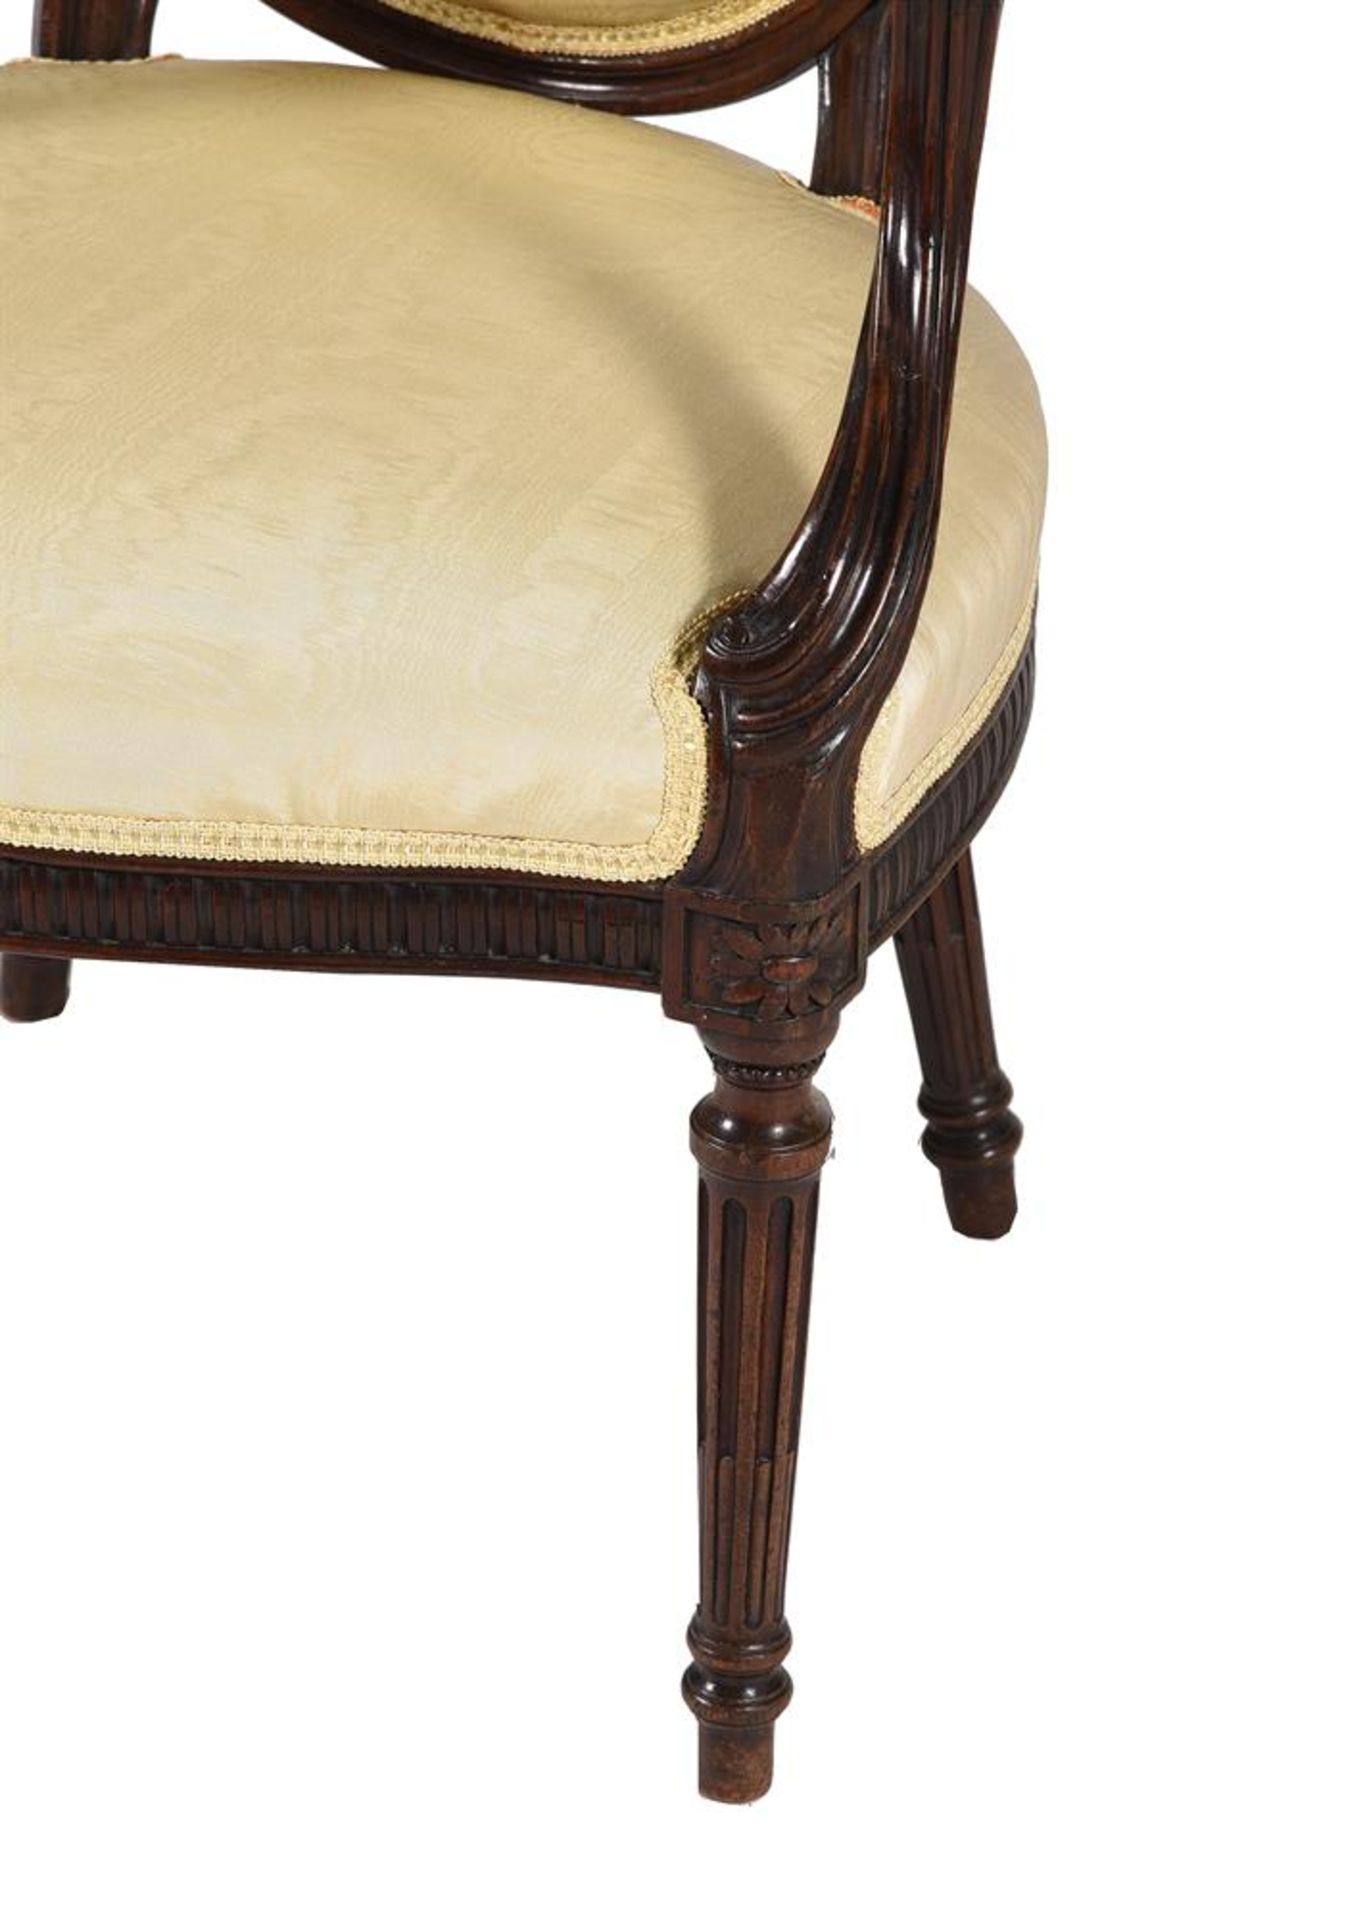 A GEORGE III MAHOGANY ARMCHAIR, IN THE MANNER OF GEORGE HEPPLEWHITE, CIRCA 1780 - Image 3 of 4